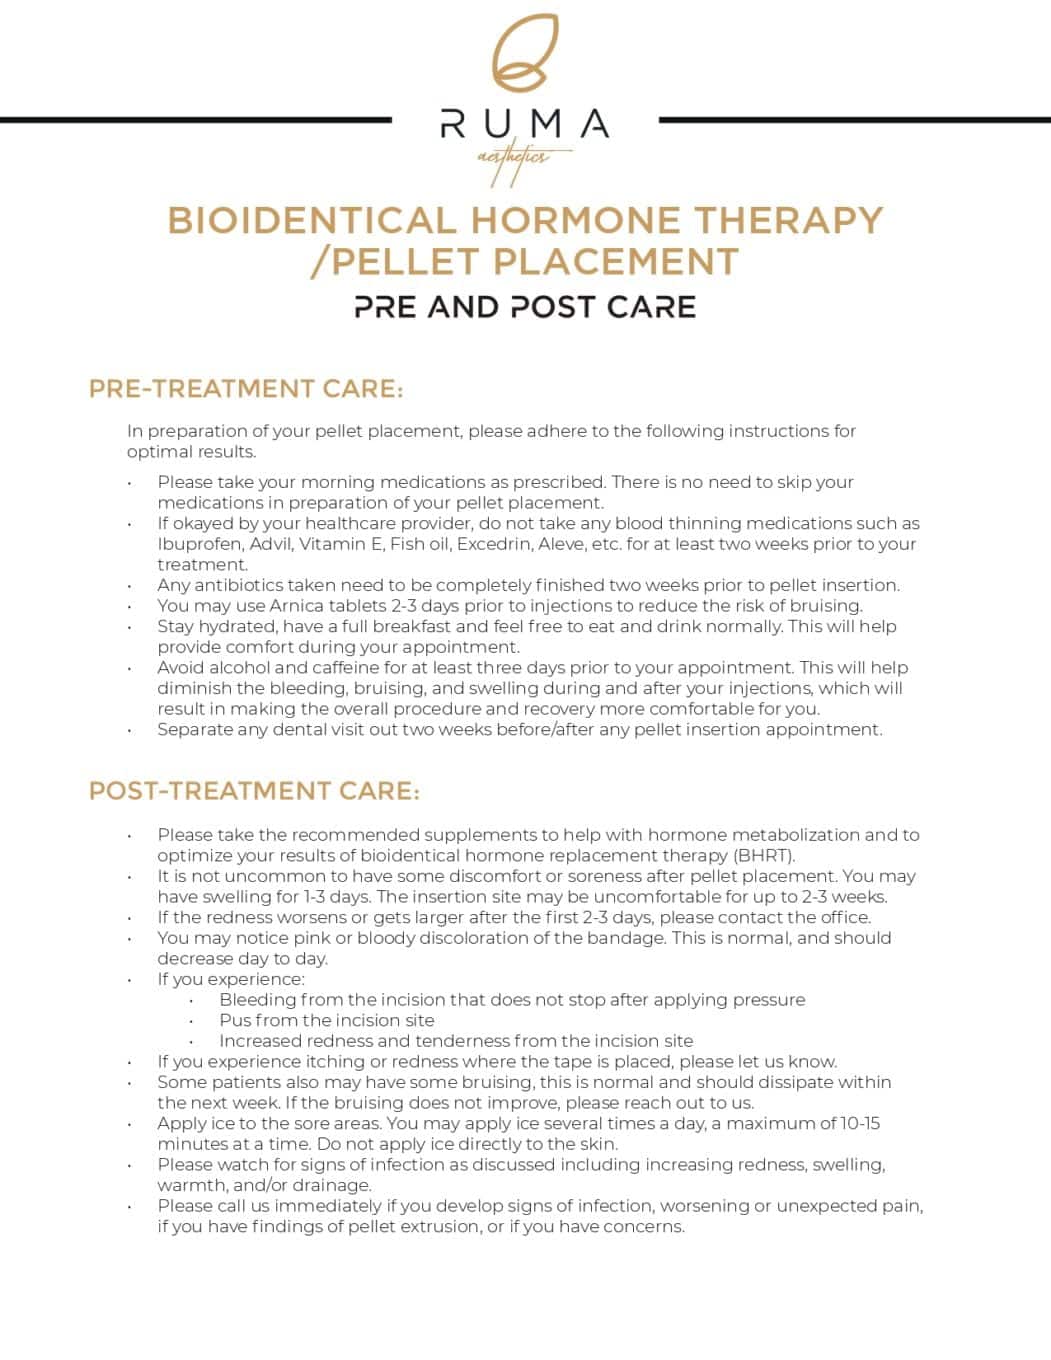 BIOIDENTICAL HORMONE THERAPY PELLET PLACEMENT PRE AND POST CARE